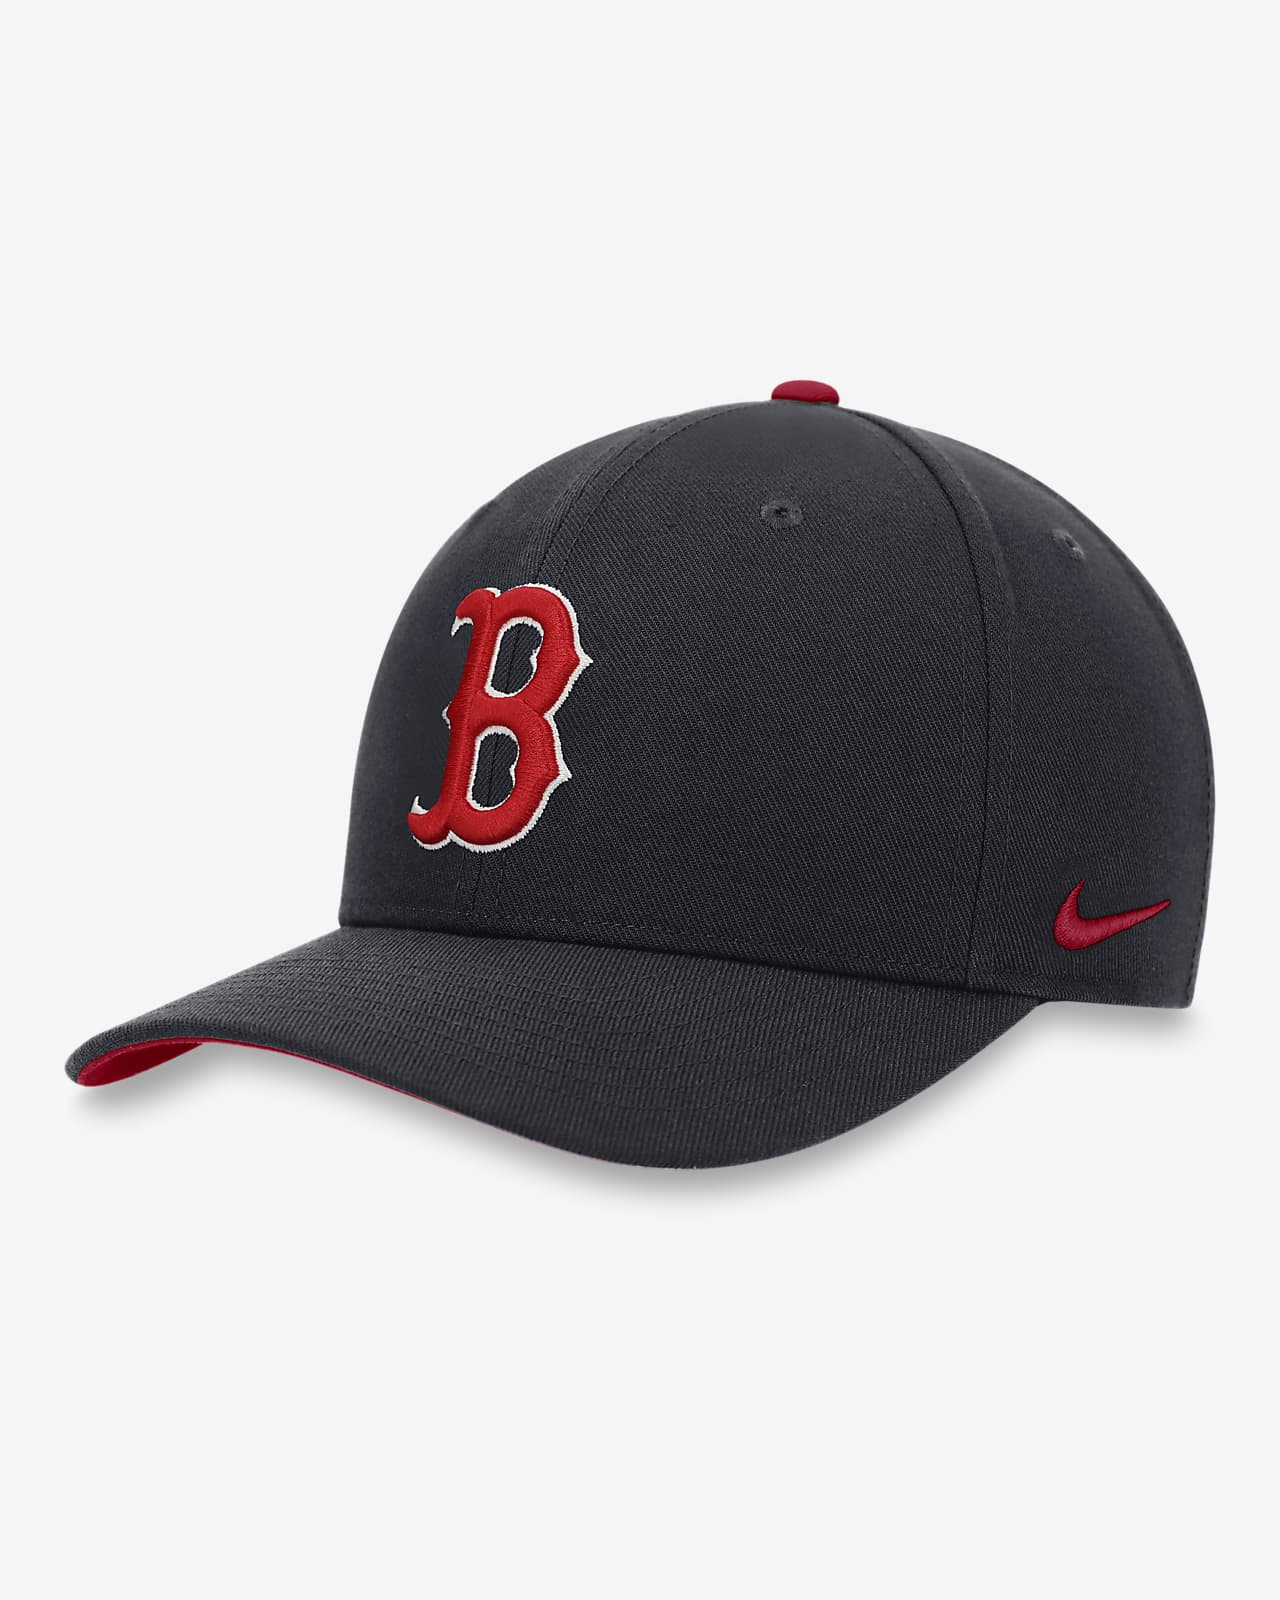 MLB Hats Caps and Clothing